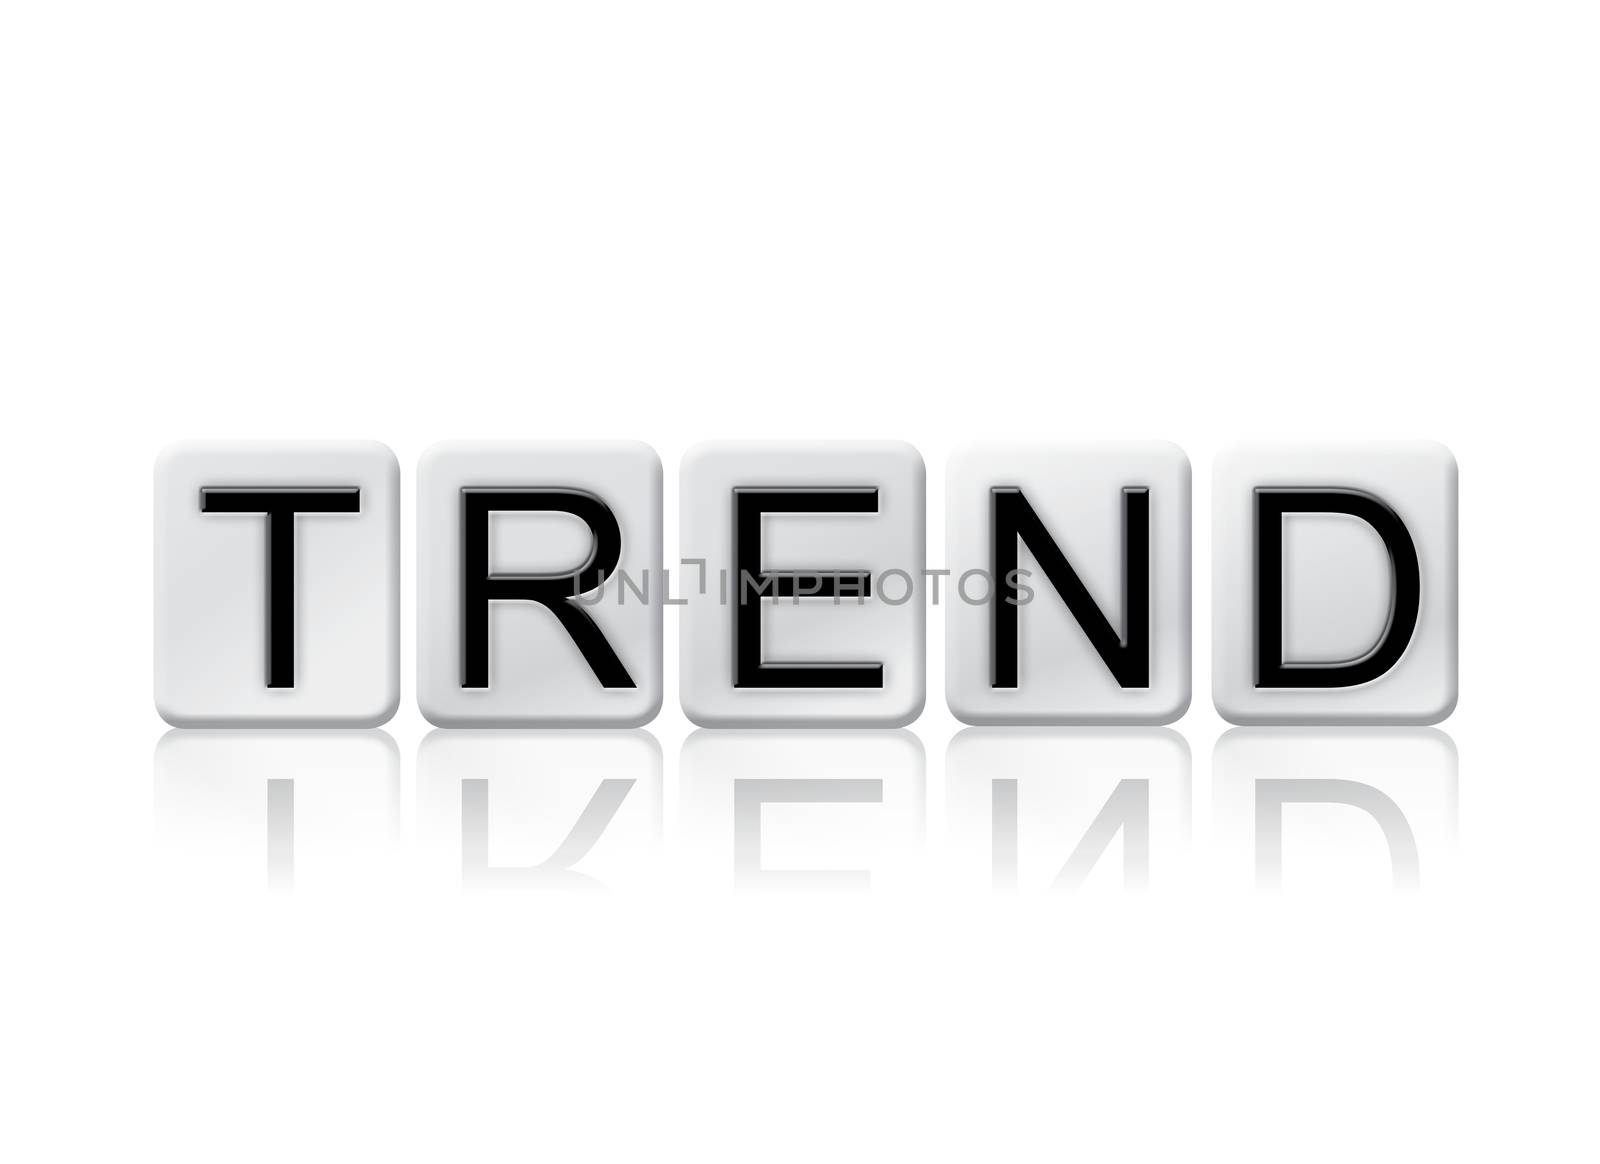 Trend Isolated Tiled Letters Concept and Theme by enterlinedesign